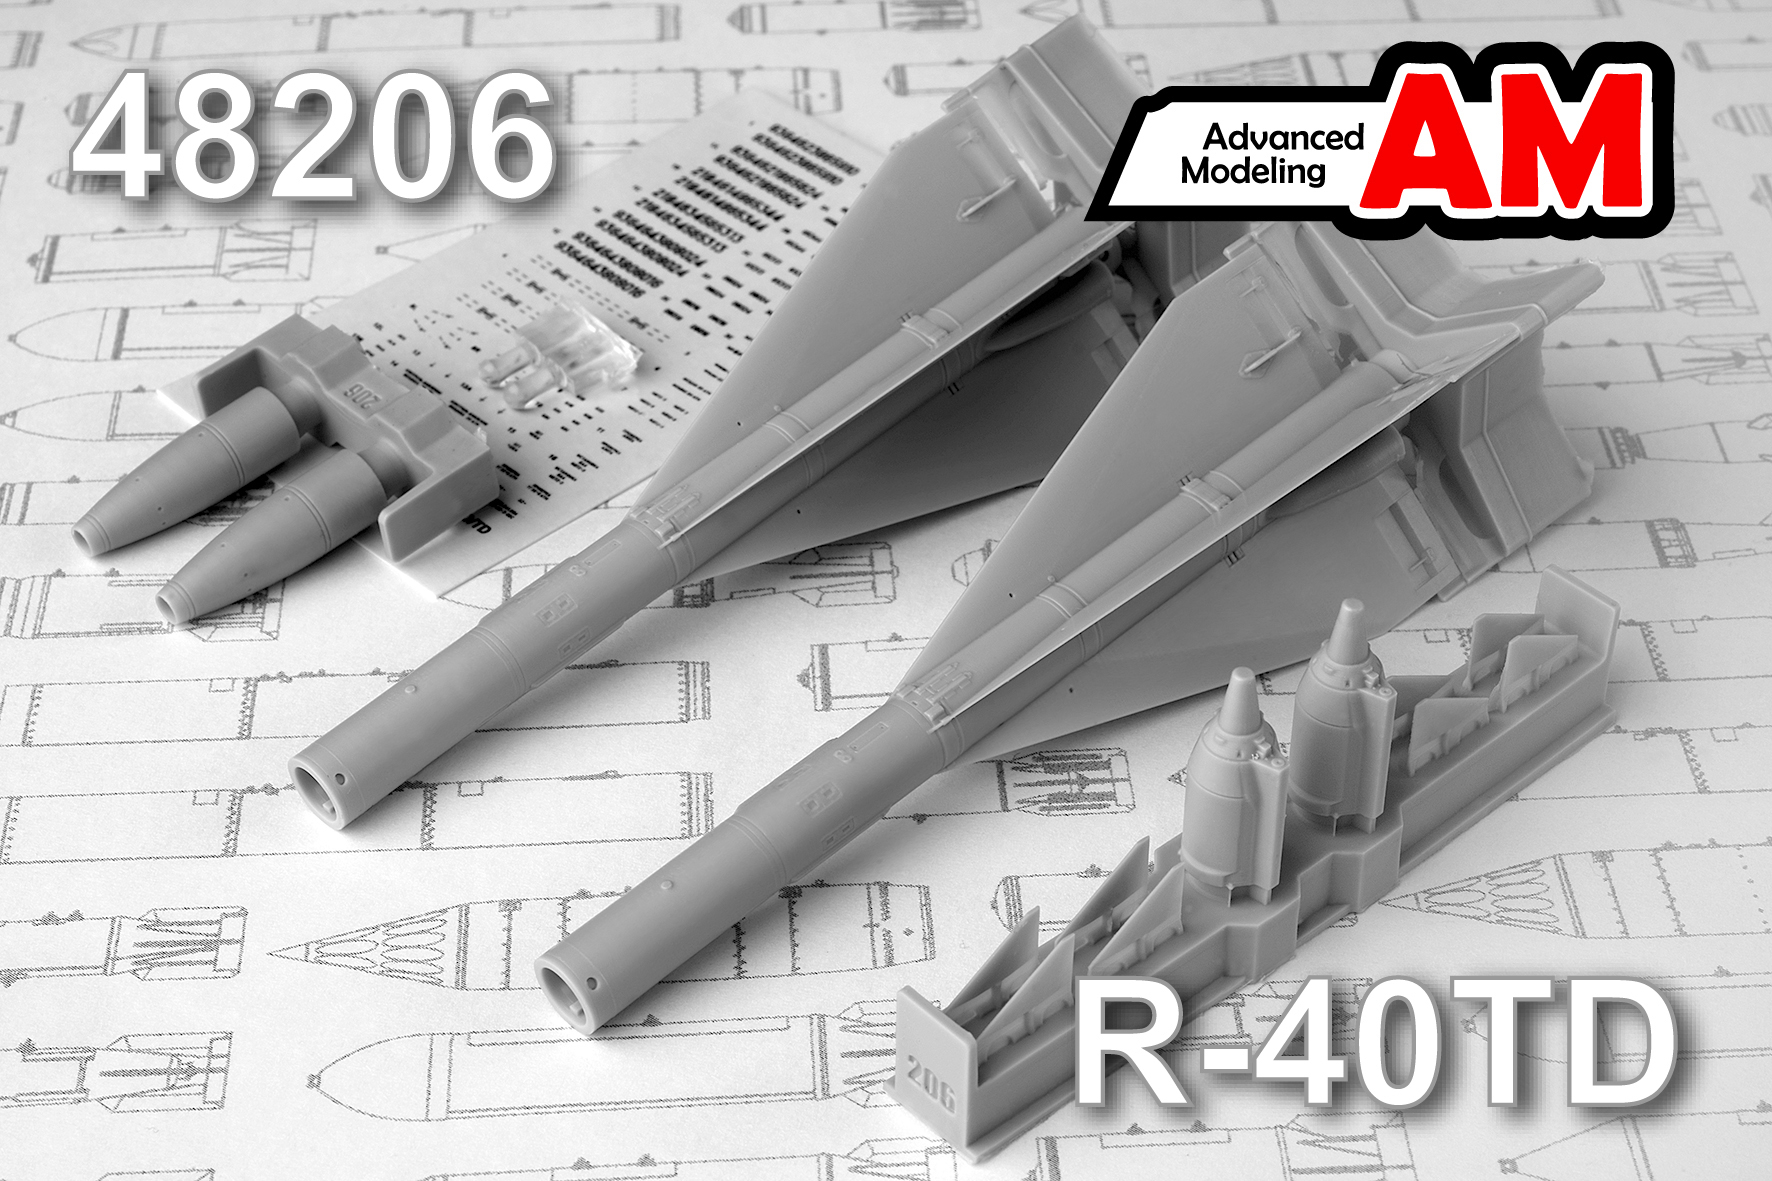 Additions (3D resin printing) 1/48 R-40TD Air to Air missile (Advanced Modeling) 